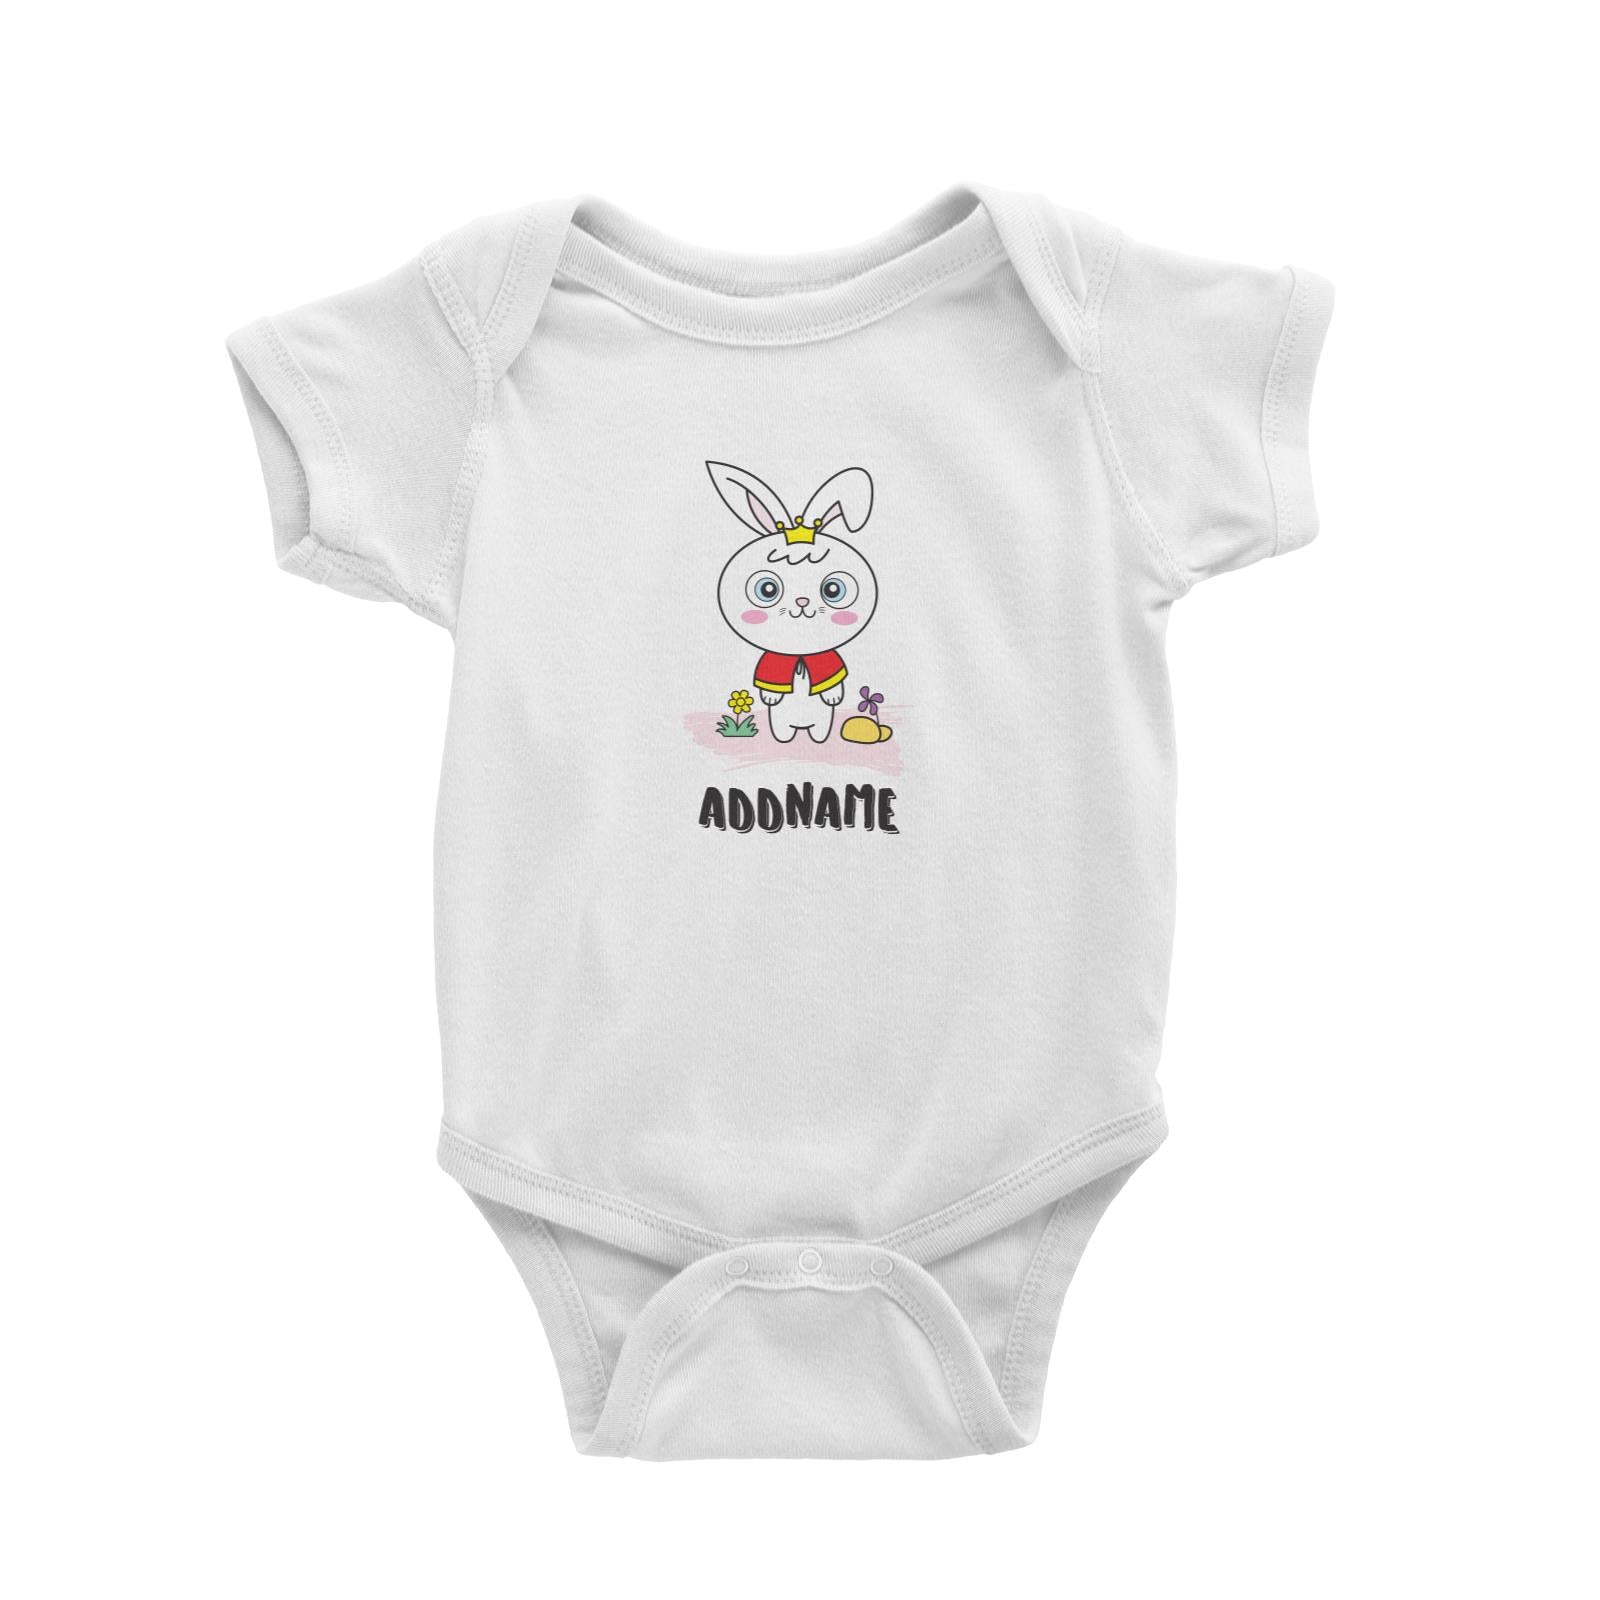 Cool Cute Animals Rabbit Rabbit With Crown Addname Baby Romper